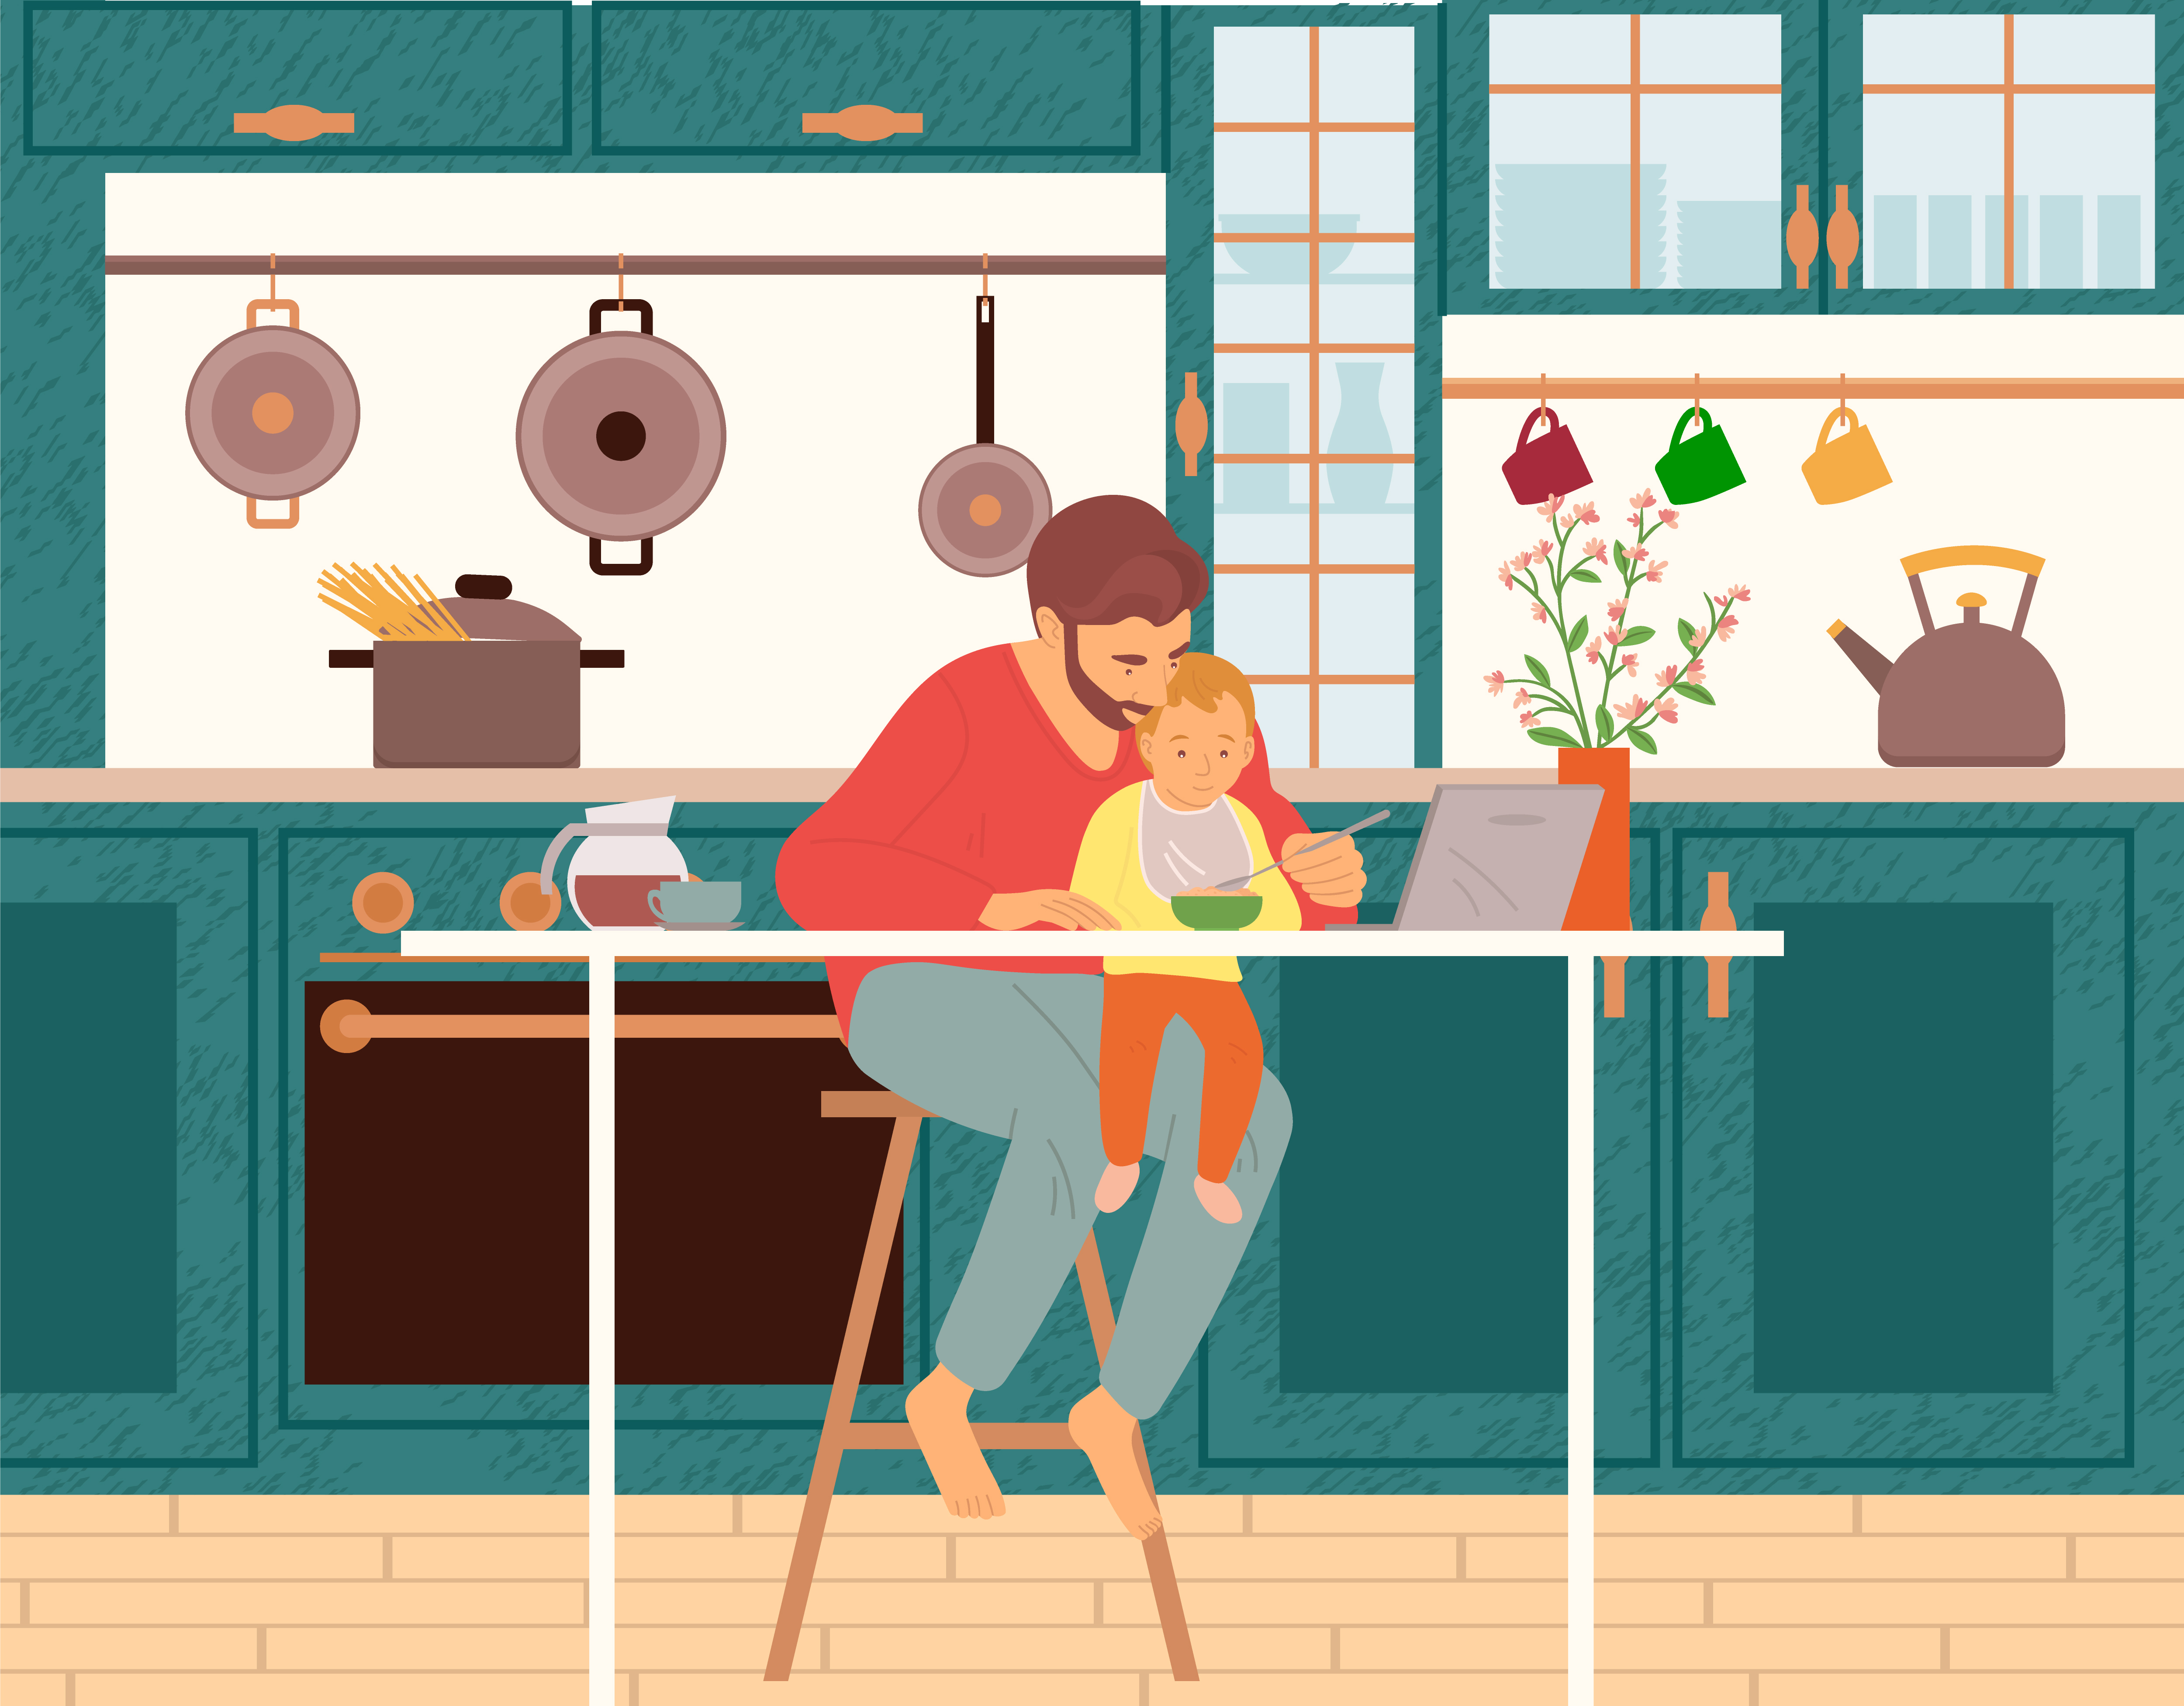 Freelancer working on laptop and feeding child in kitchen. Male character holding baby on laps looking at screen of computer. Interior of room with stove, kettle and utensils kitchenware vector. Father Feeding Child While Working in Kitchen